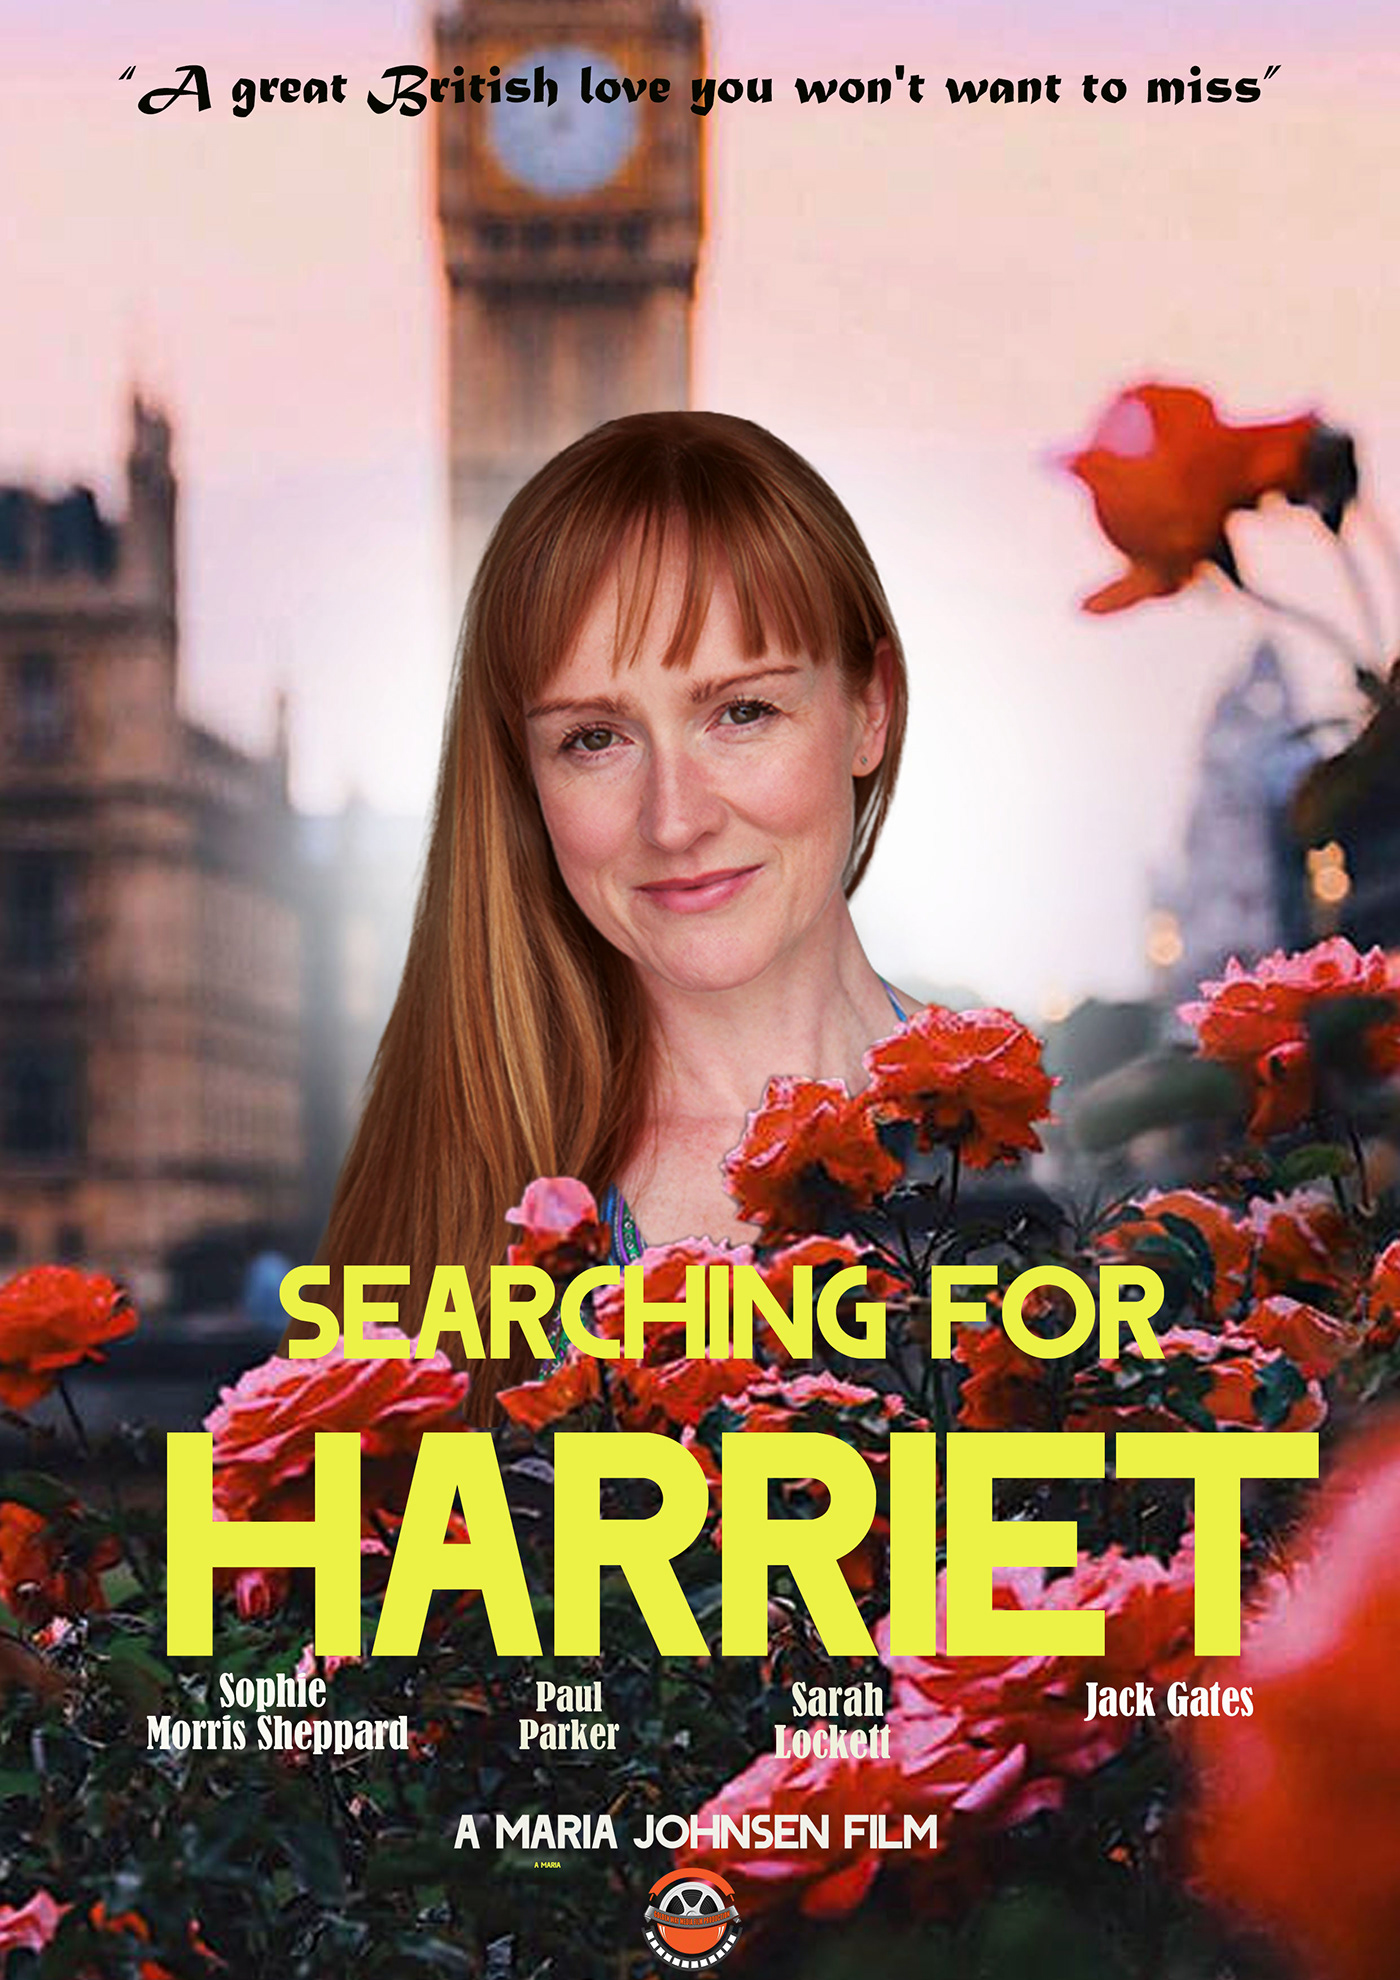 actress film production romance romantic film Searching for Harriet